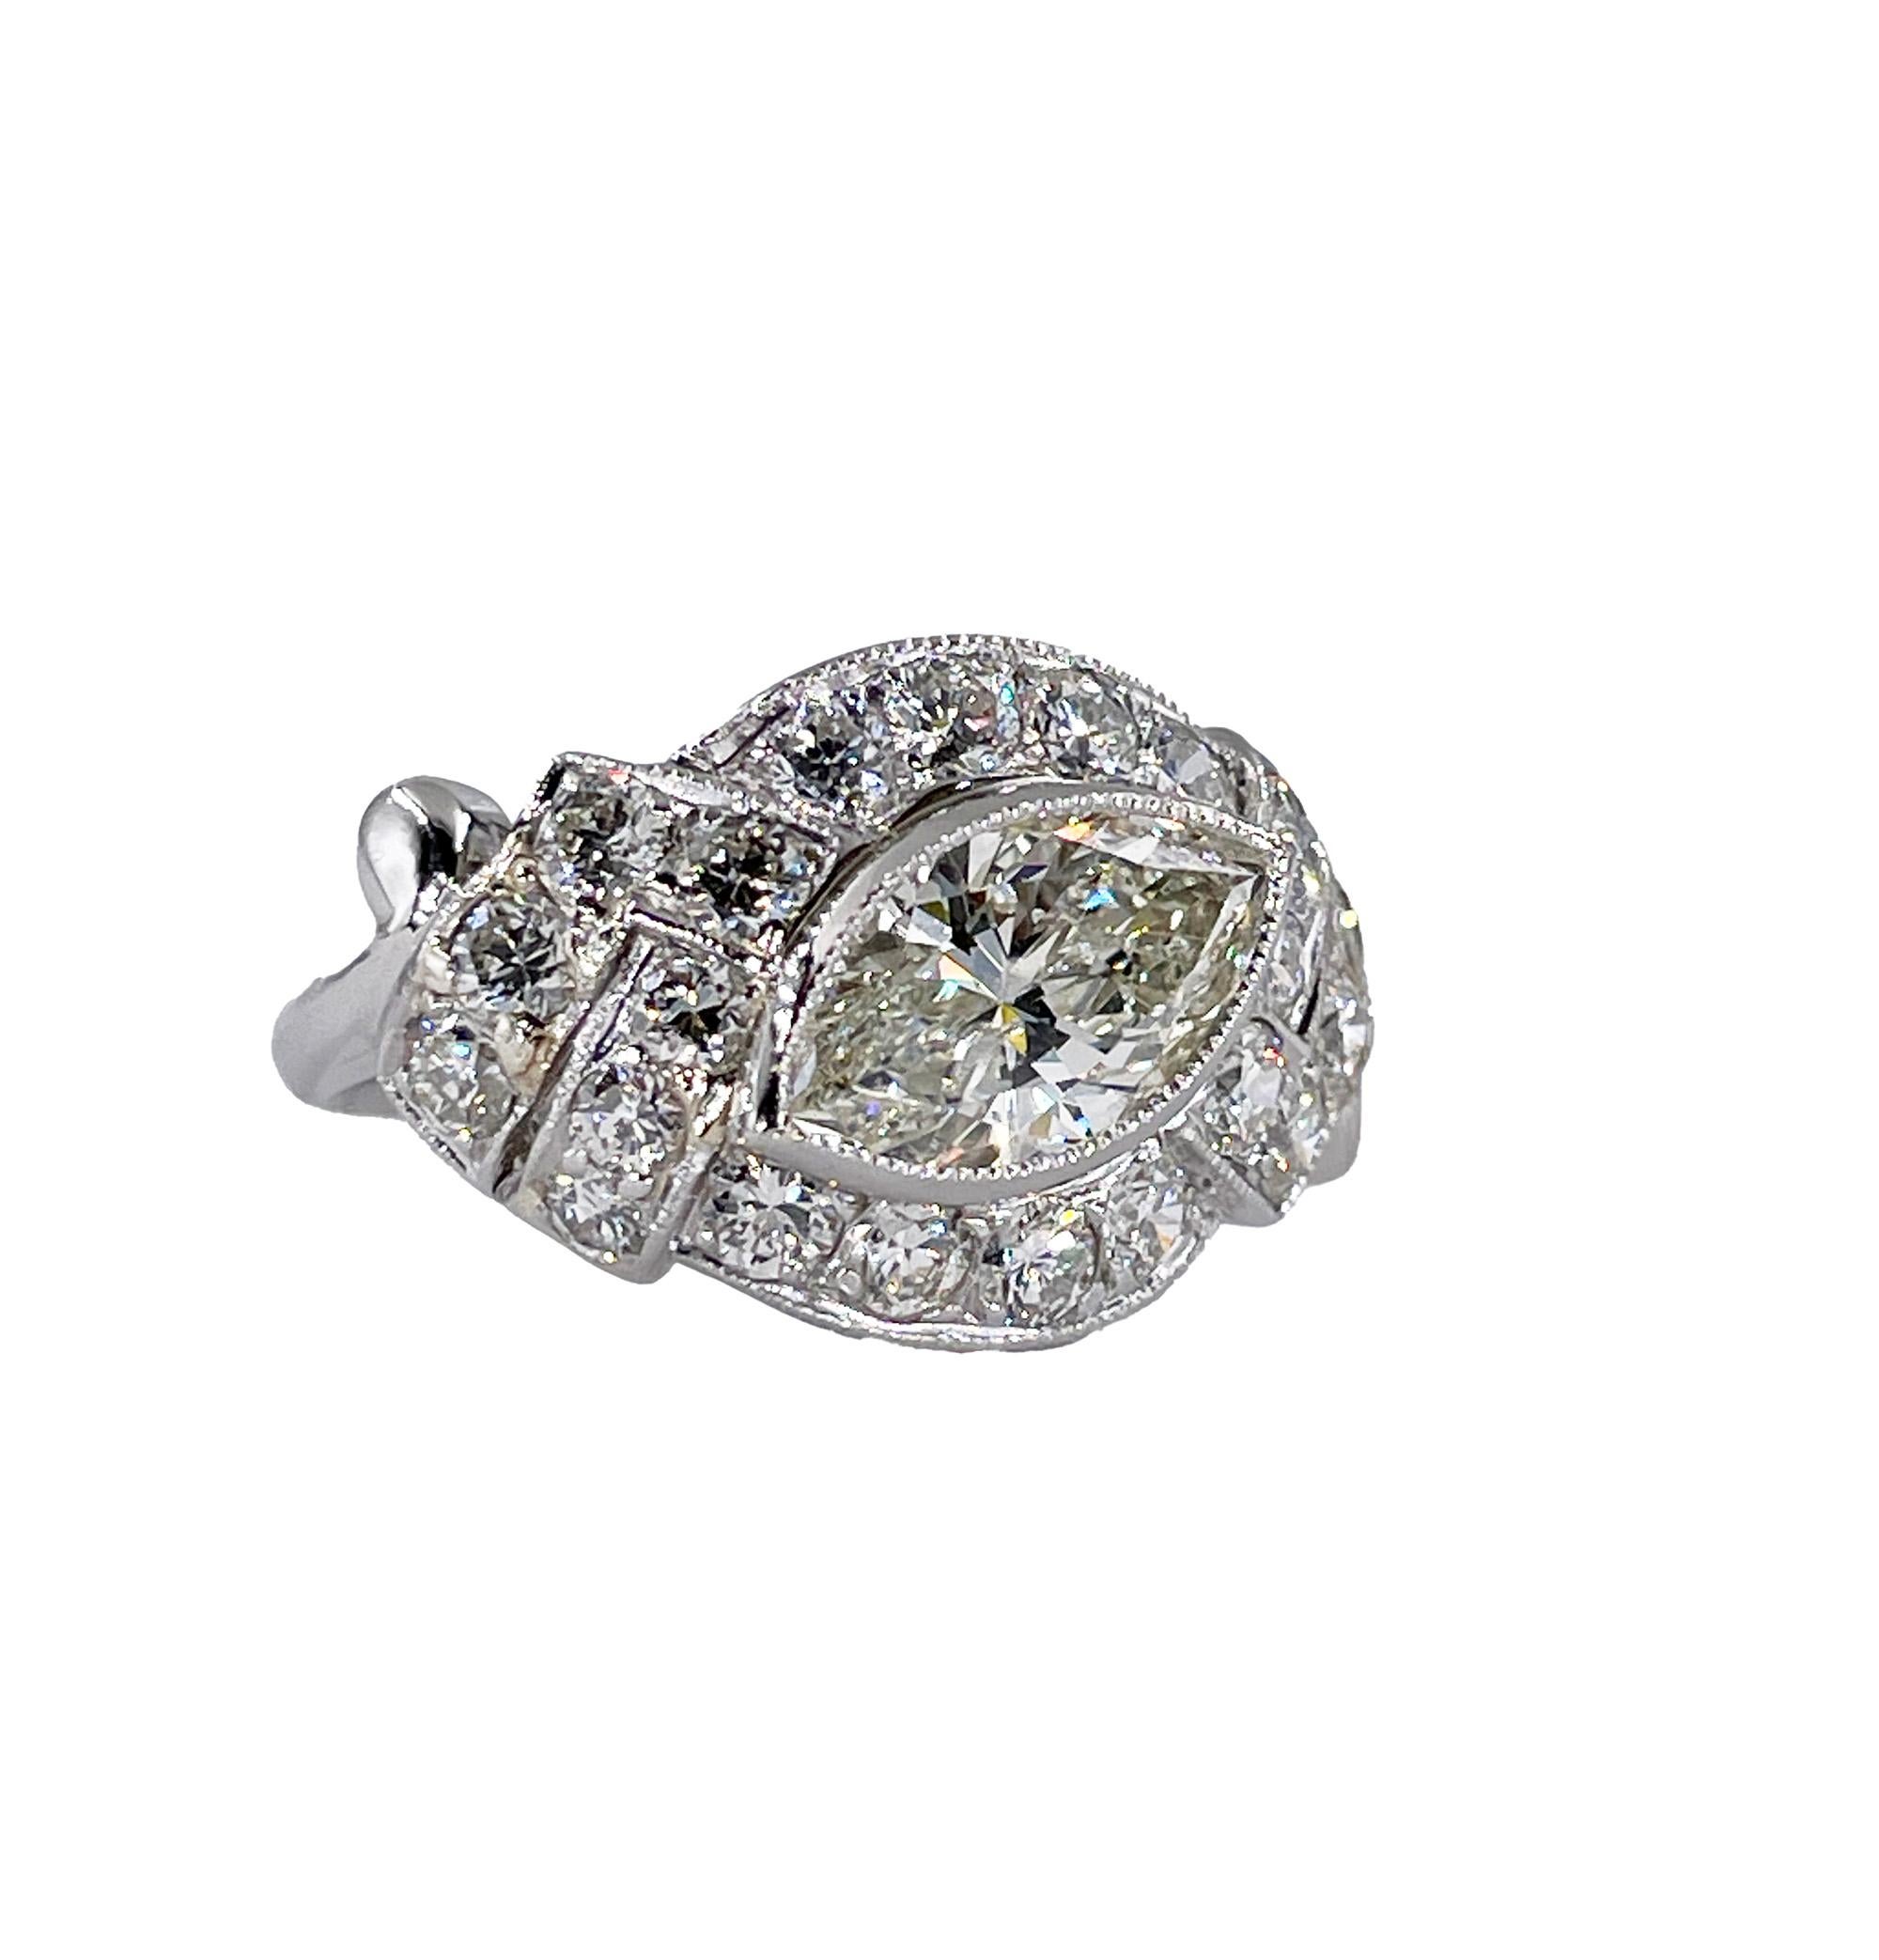 1920 Art Deco 2.51ct Moval Marquise Cut Diamond Engagement Anniversary Antique Platinum Ring

What a rare and a dazzling dream ring, Circa 1920s. This exquisite Deco setting, finely crafted in handmade Platinum and presents a rather unusually